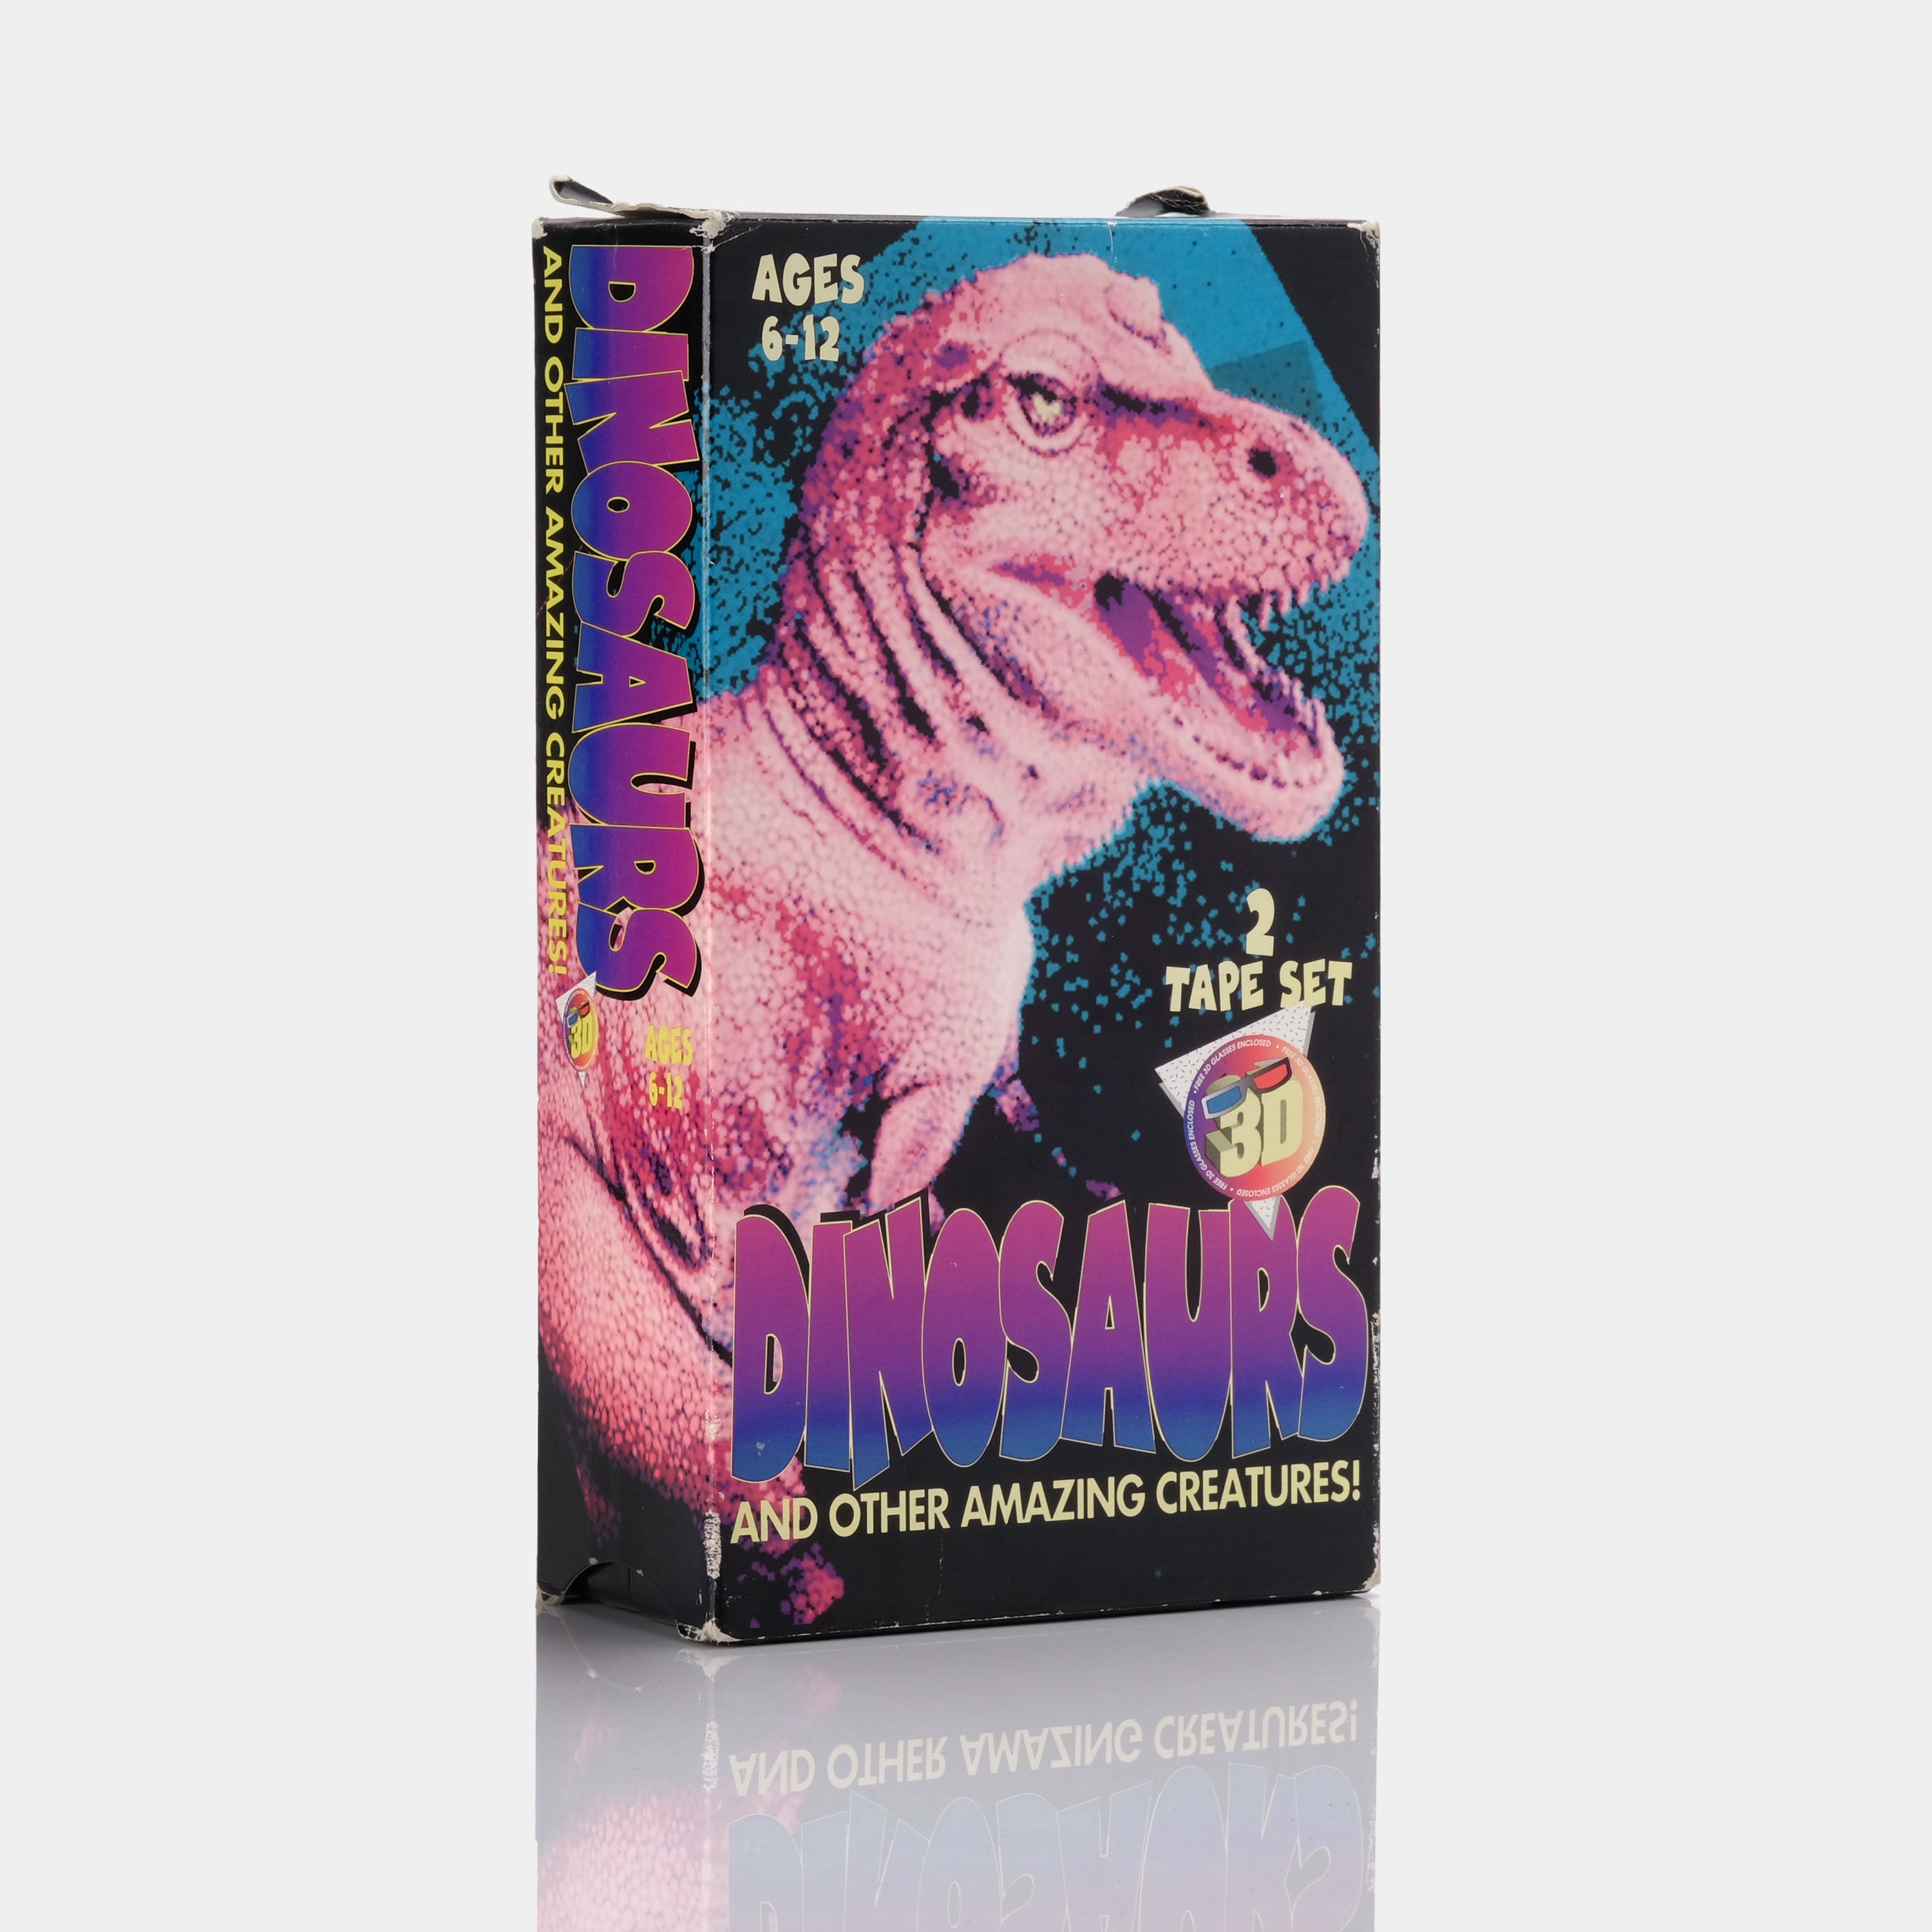 Dinosaurs and Other Amazing Creatures (3D) VHS Tape Set